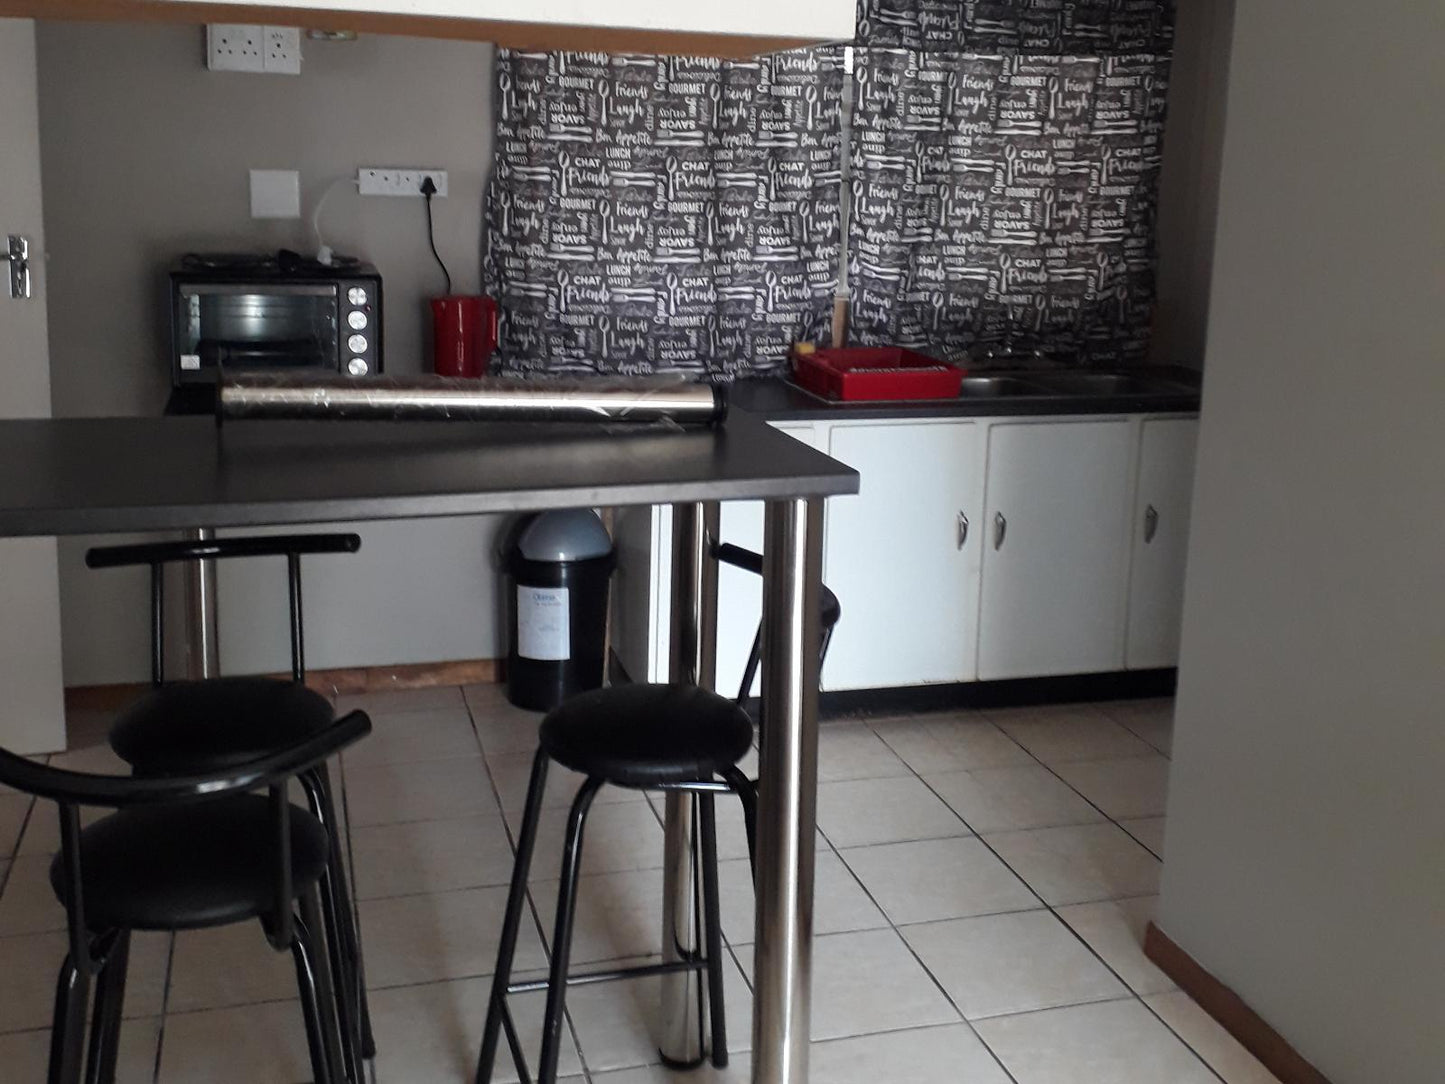 2 Bedroom Apartment @ Caledon Overnight Rooms